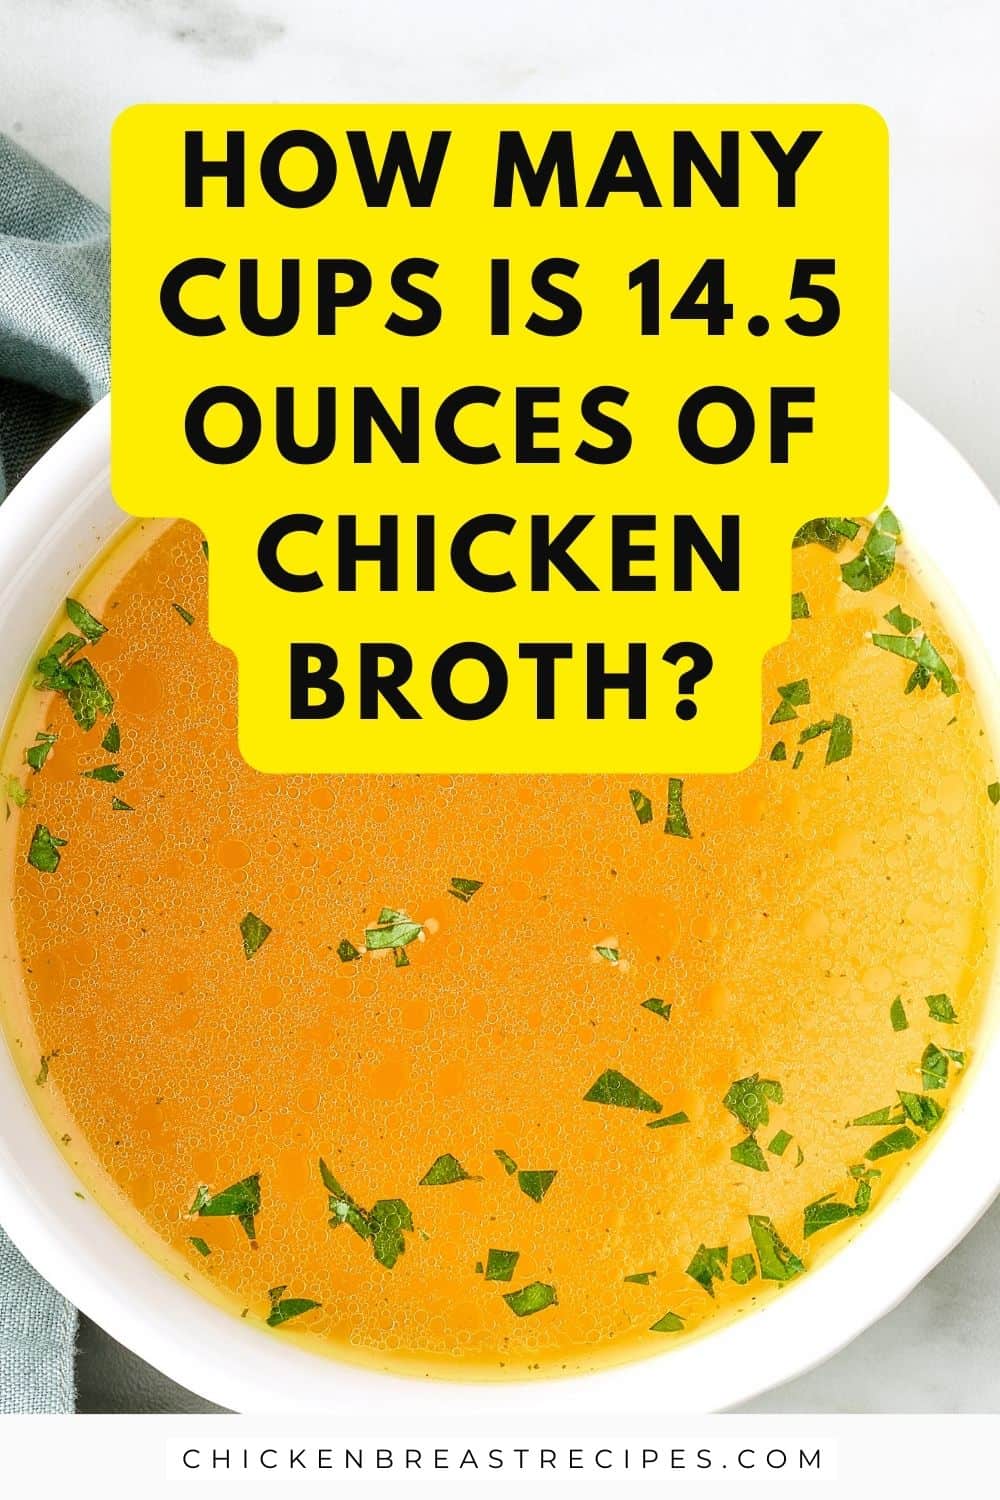 How Many Cups is 14.5 Ounces of Chicken Broth?